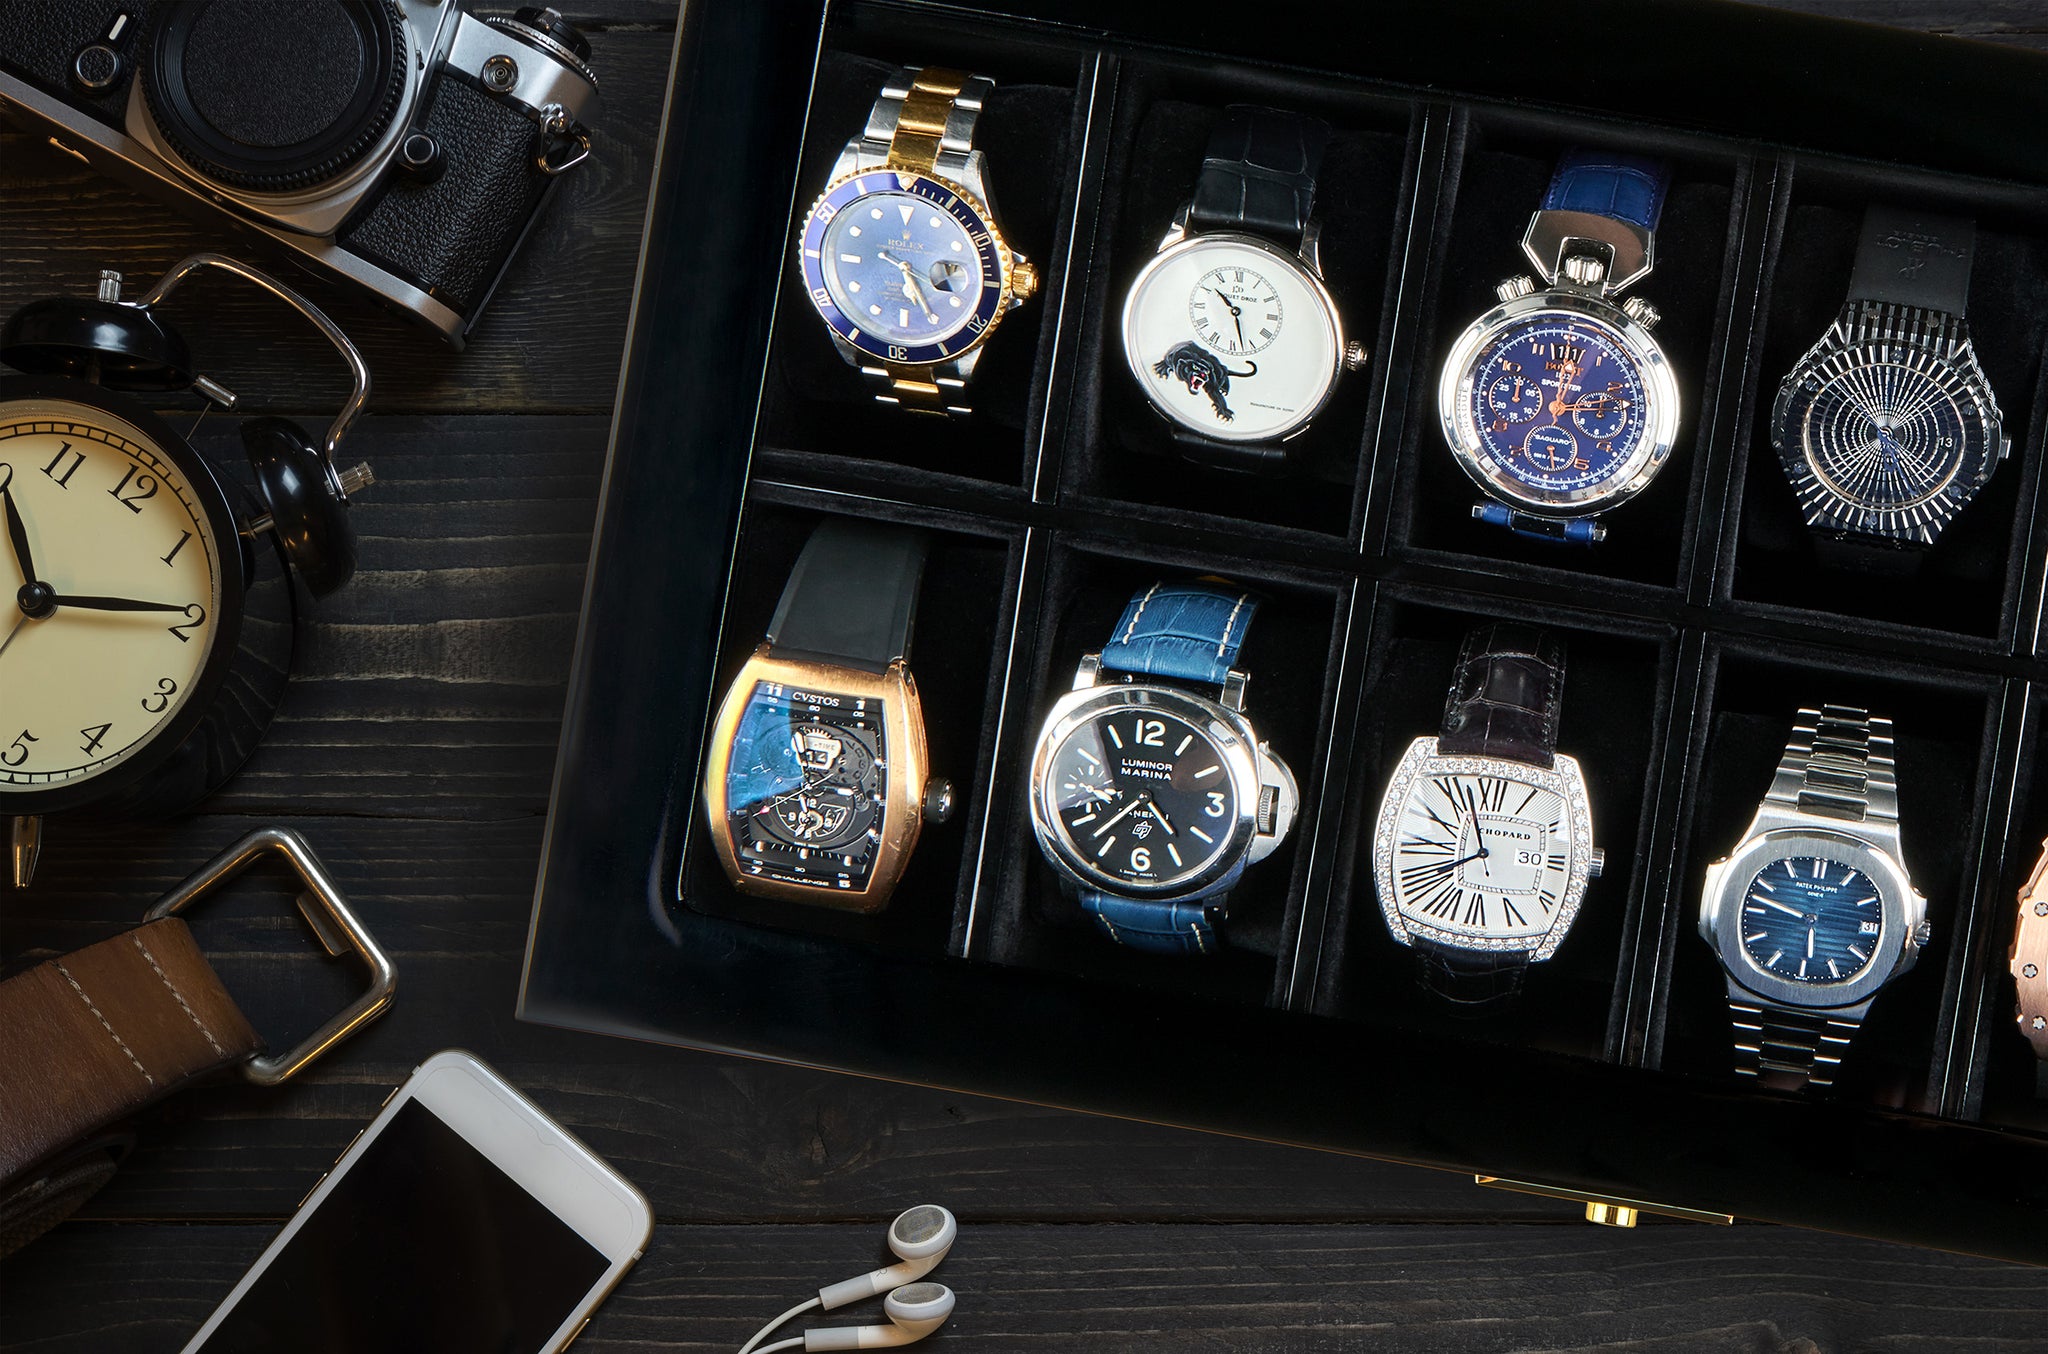 Watch Box Valet for 4 Watches | Deferichs